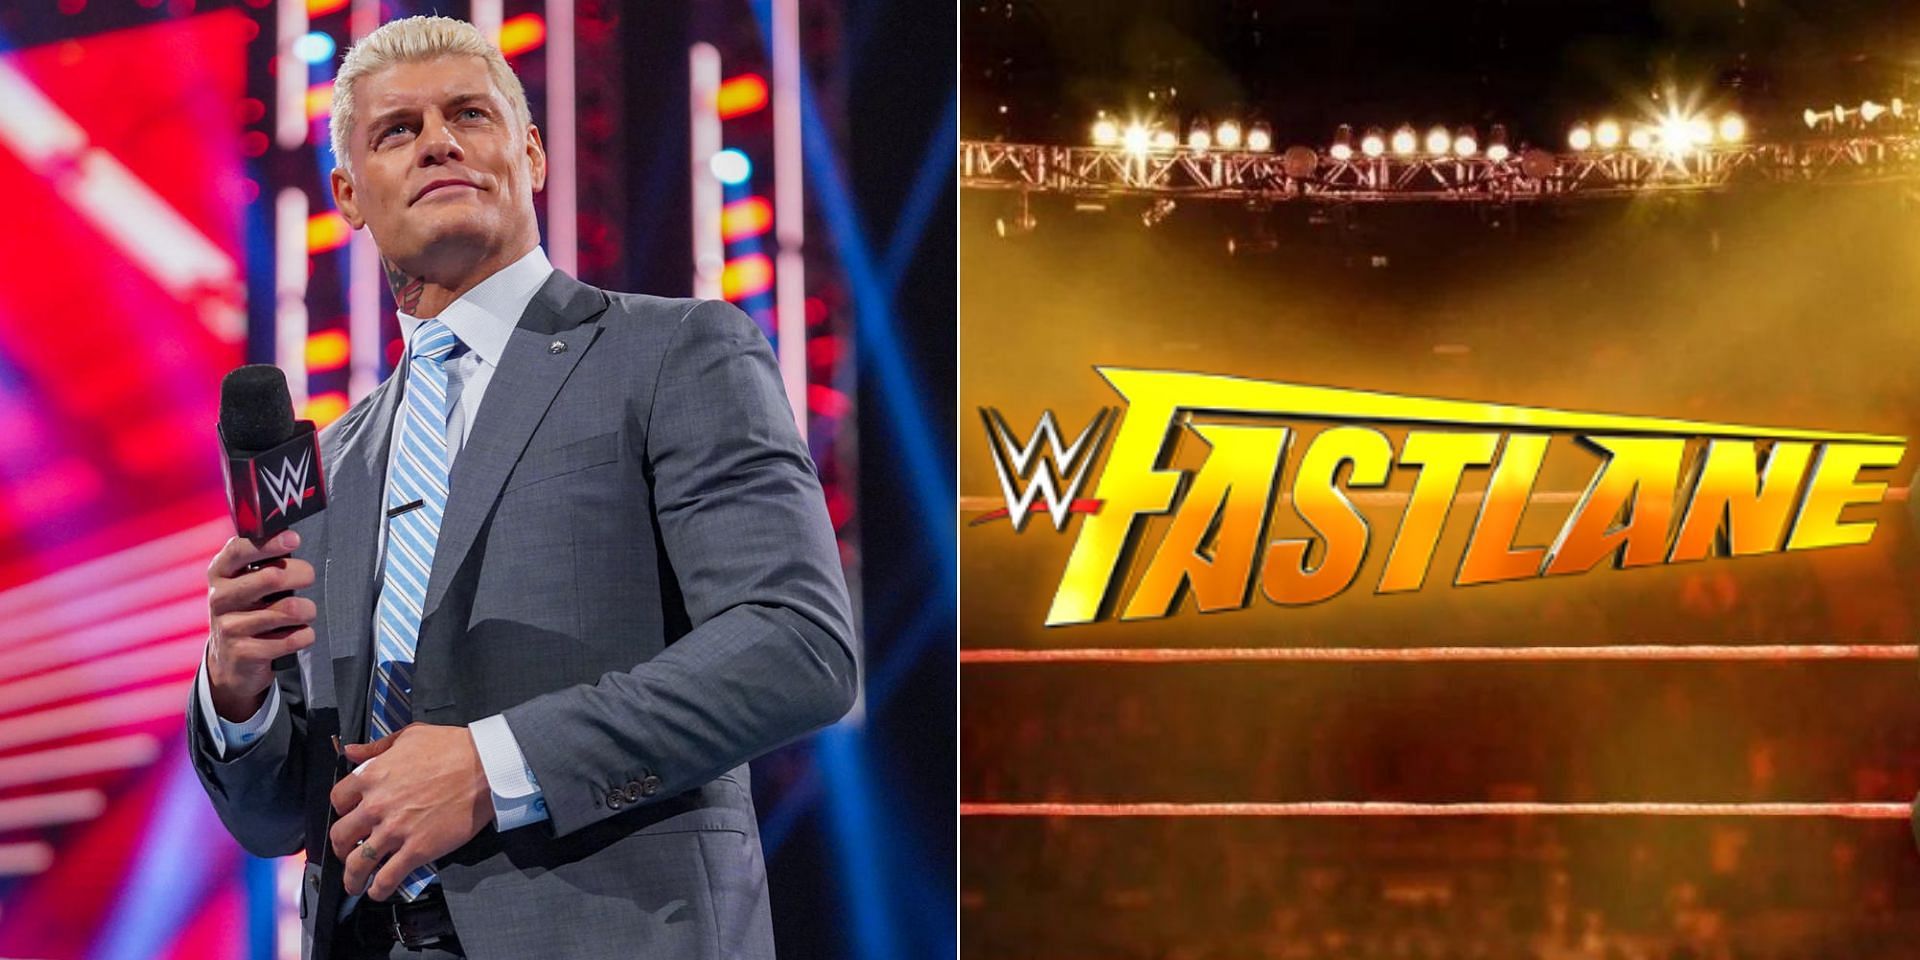 Cod Rhodes will compete in a title match at WWE Fastlane